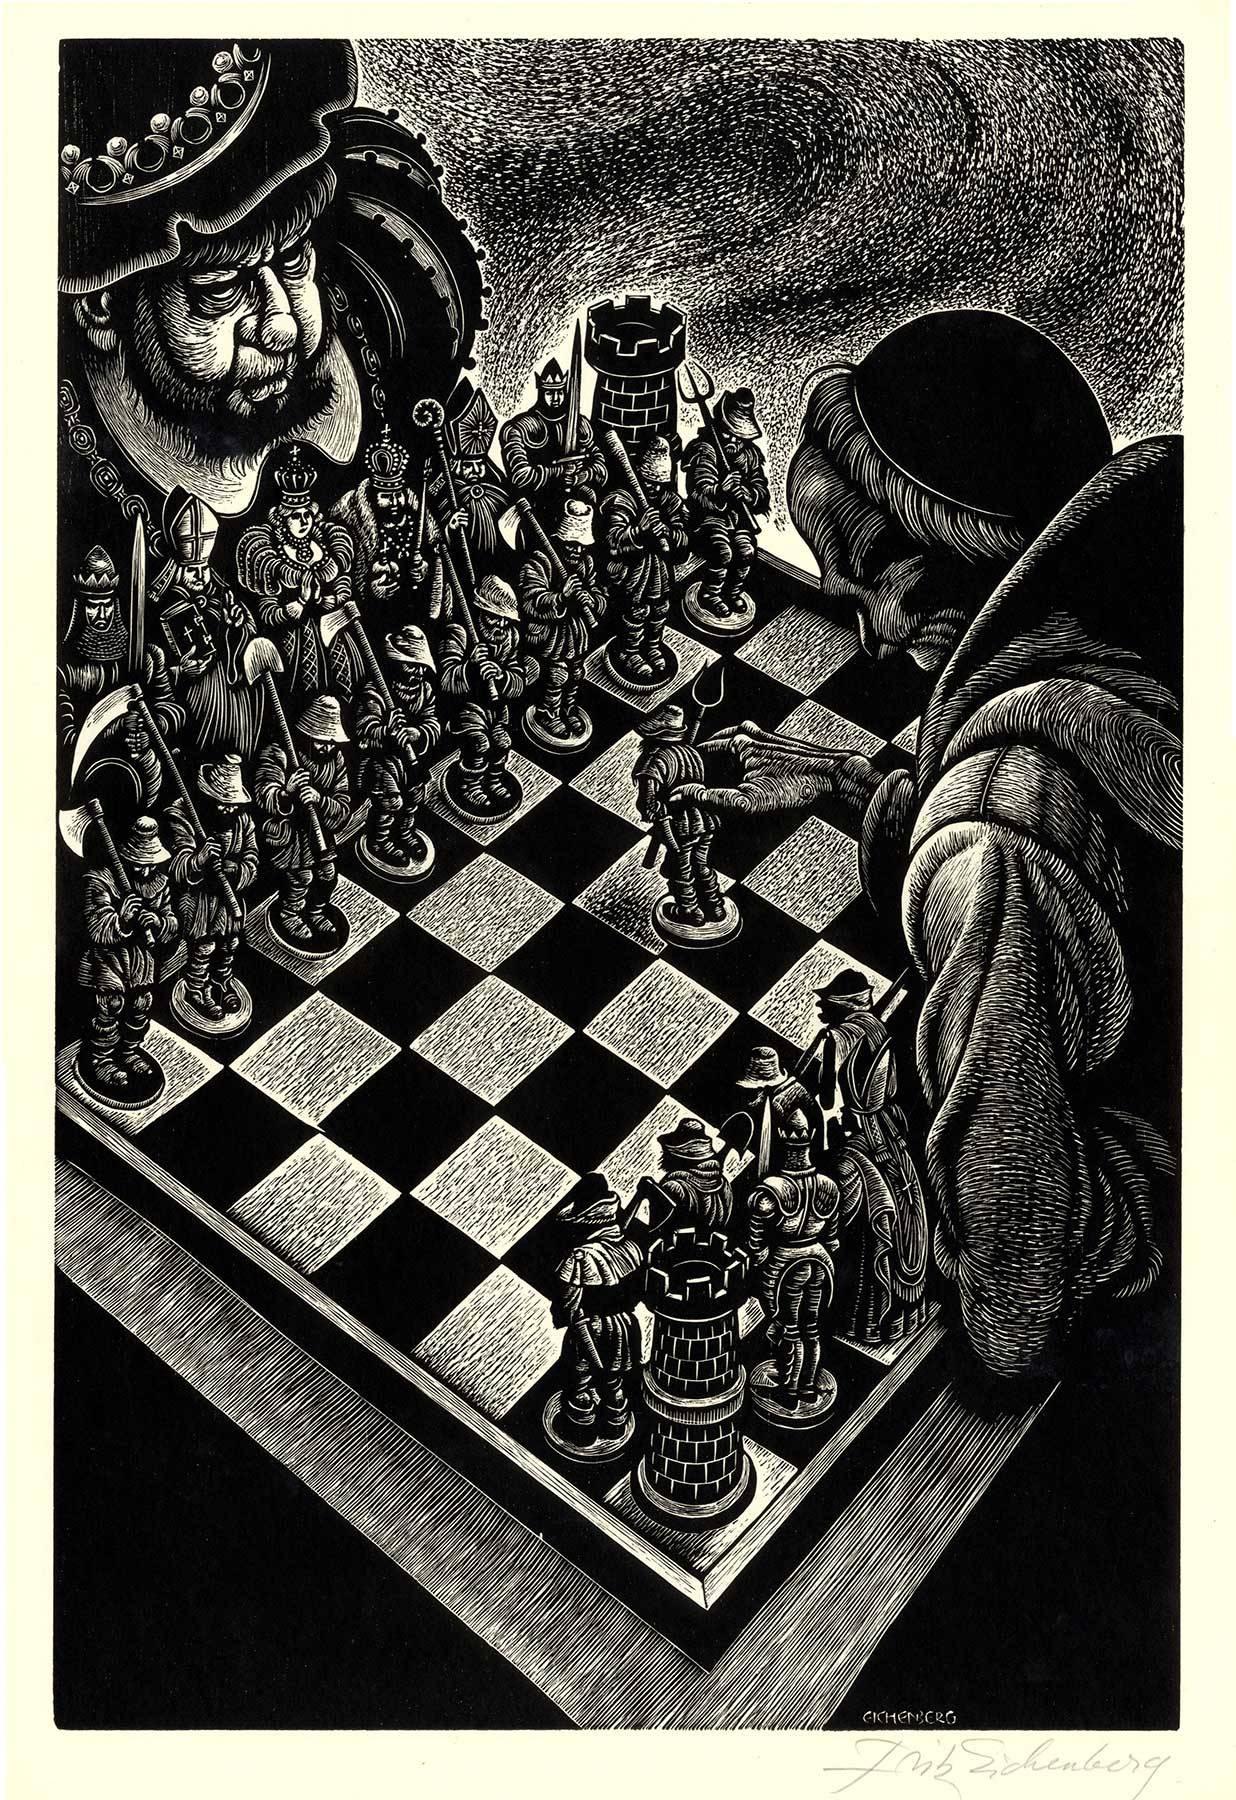 Follies of Princely Power (A chess match as a metaphor for warfare)